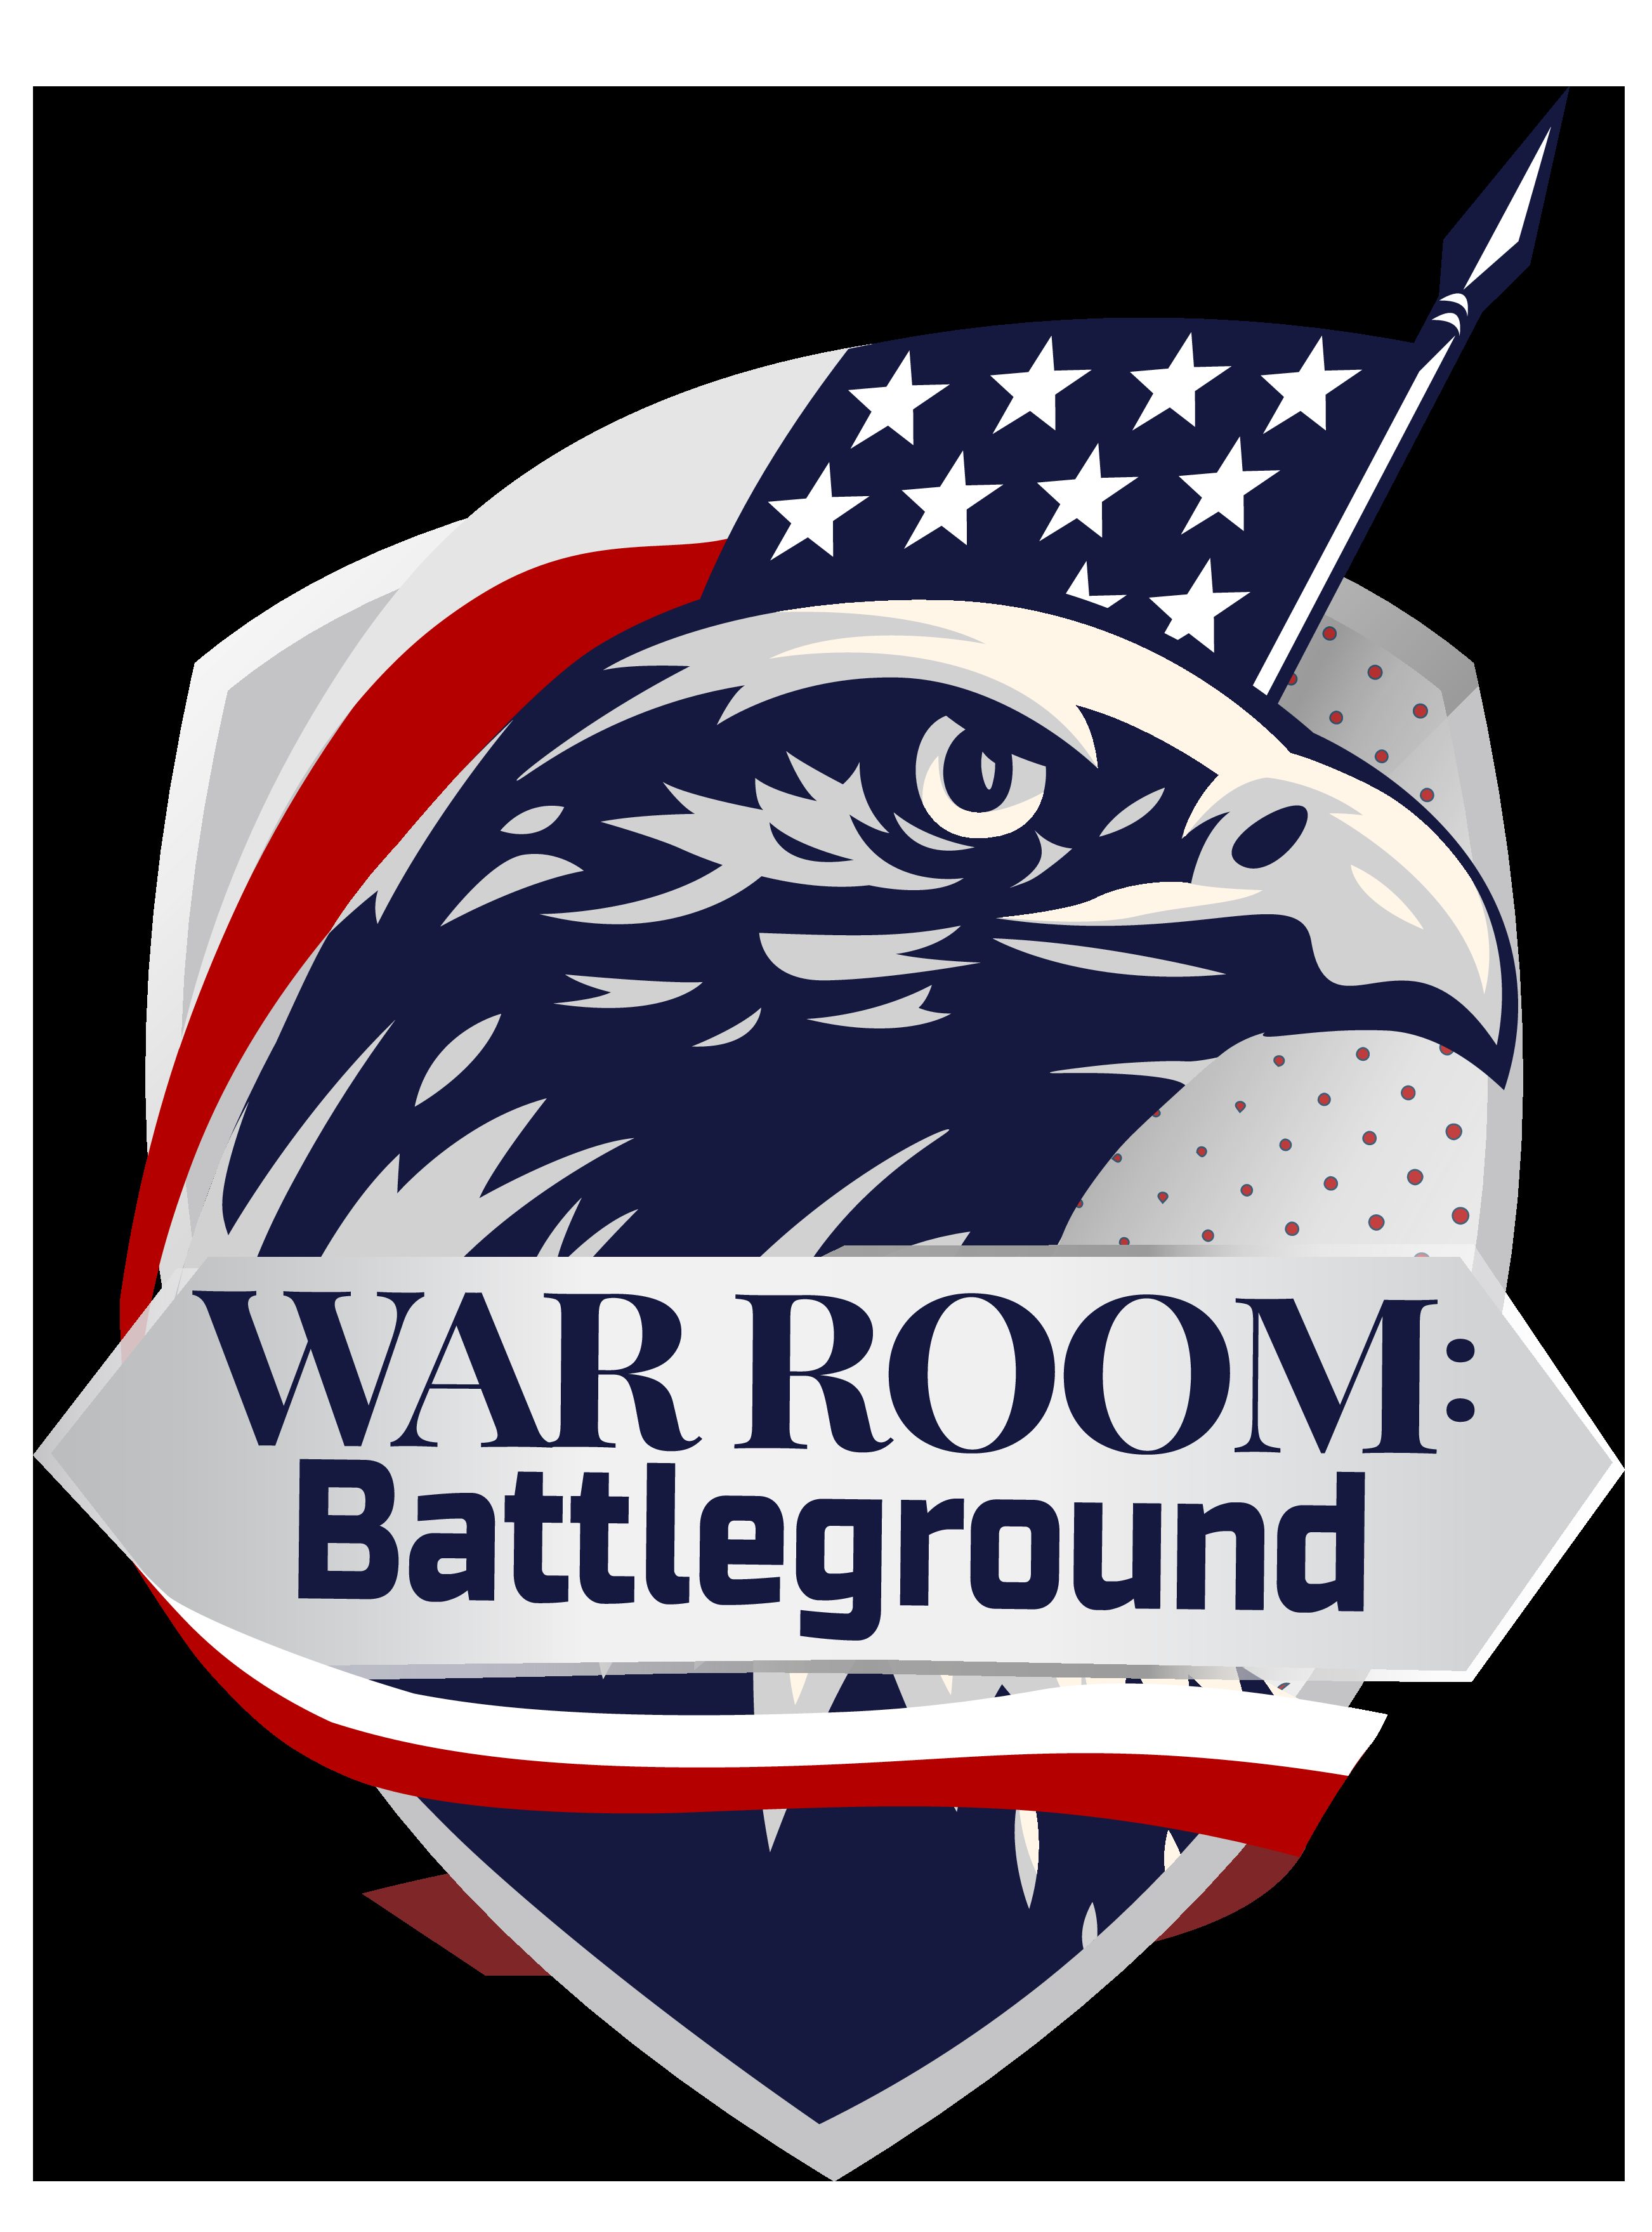 WarRoom Battleground EP 251: Who Will Bailout The American People?